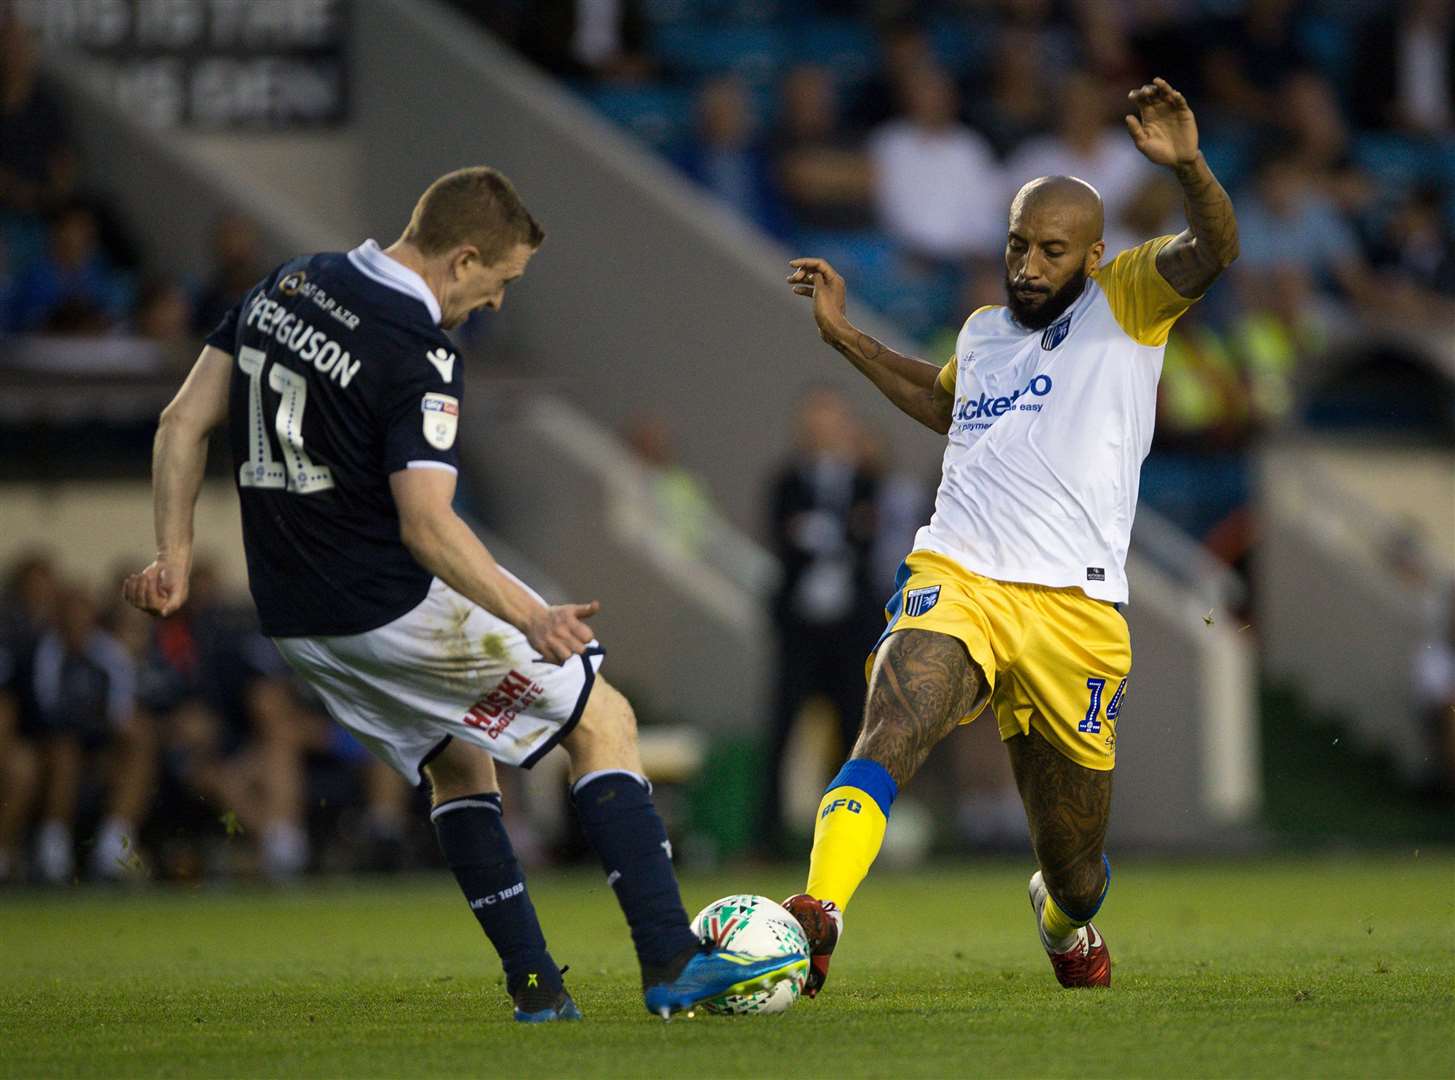 Josh Parker challenges with Millwall's Shane Ferguson on Tuesday night Picture: Ady Kerry